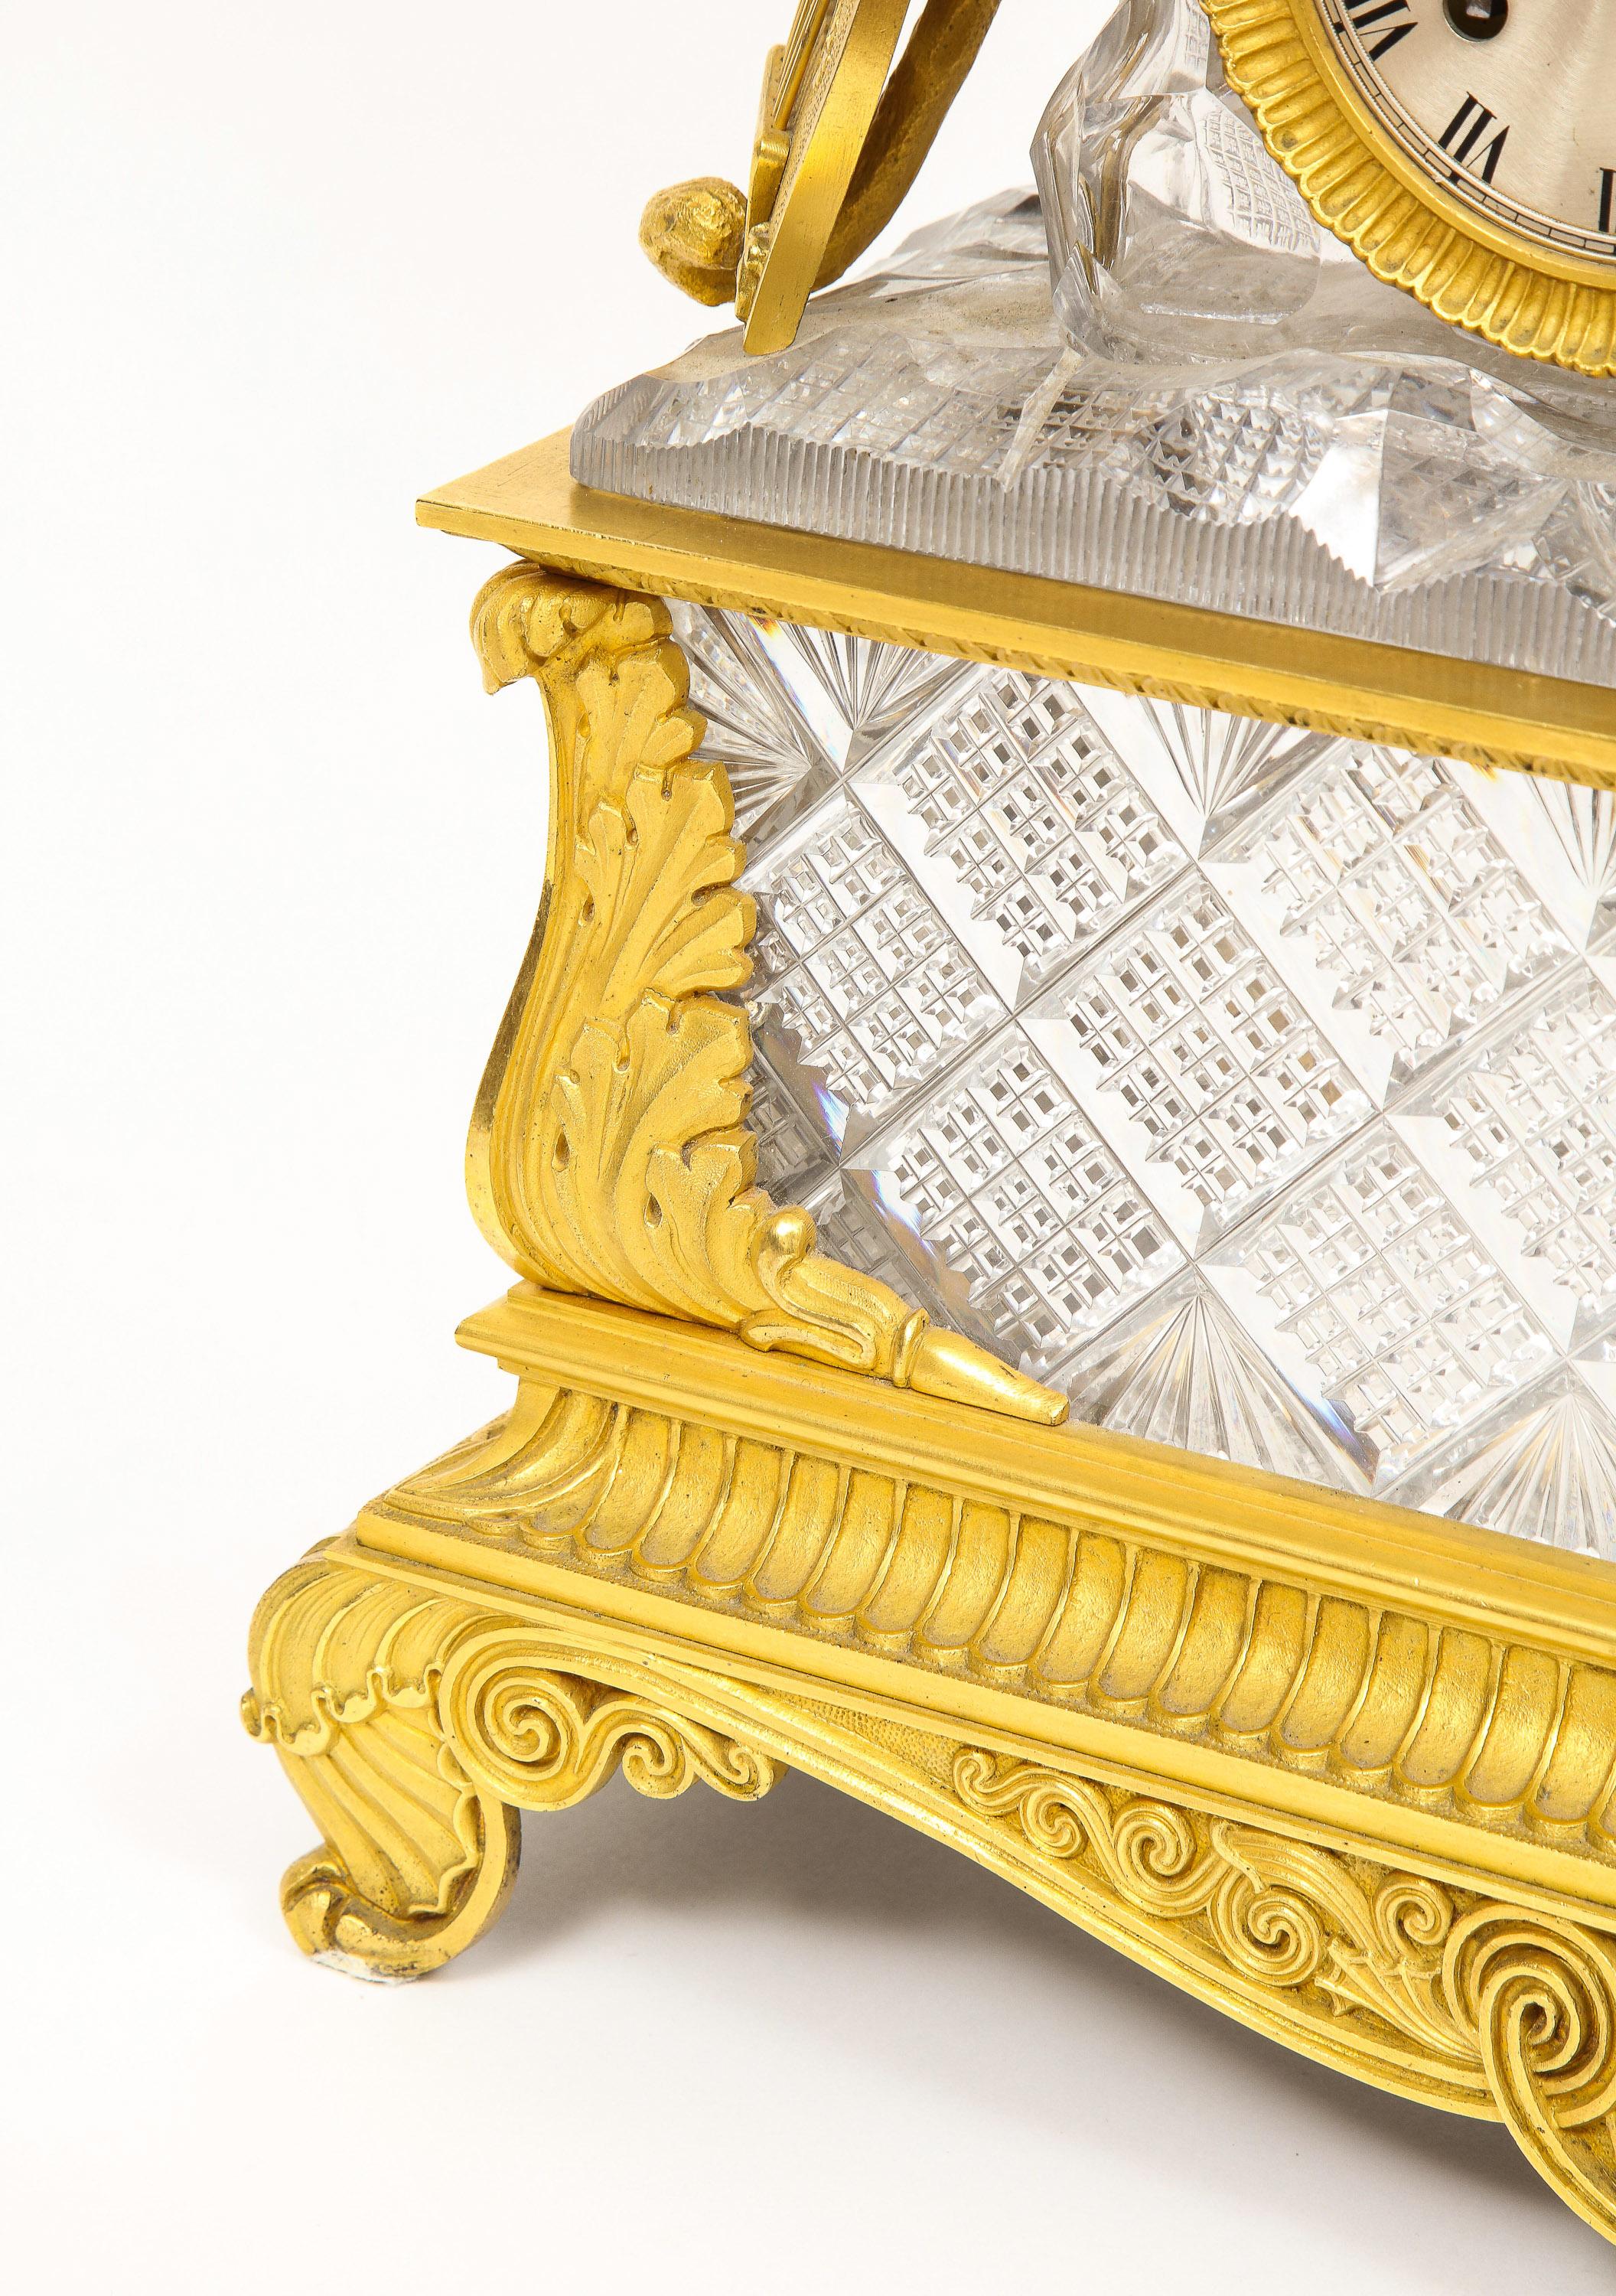 Exquisite French Empire Ormolu and Cut-Crystal Clock, c. 1815 For Sale 13